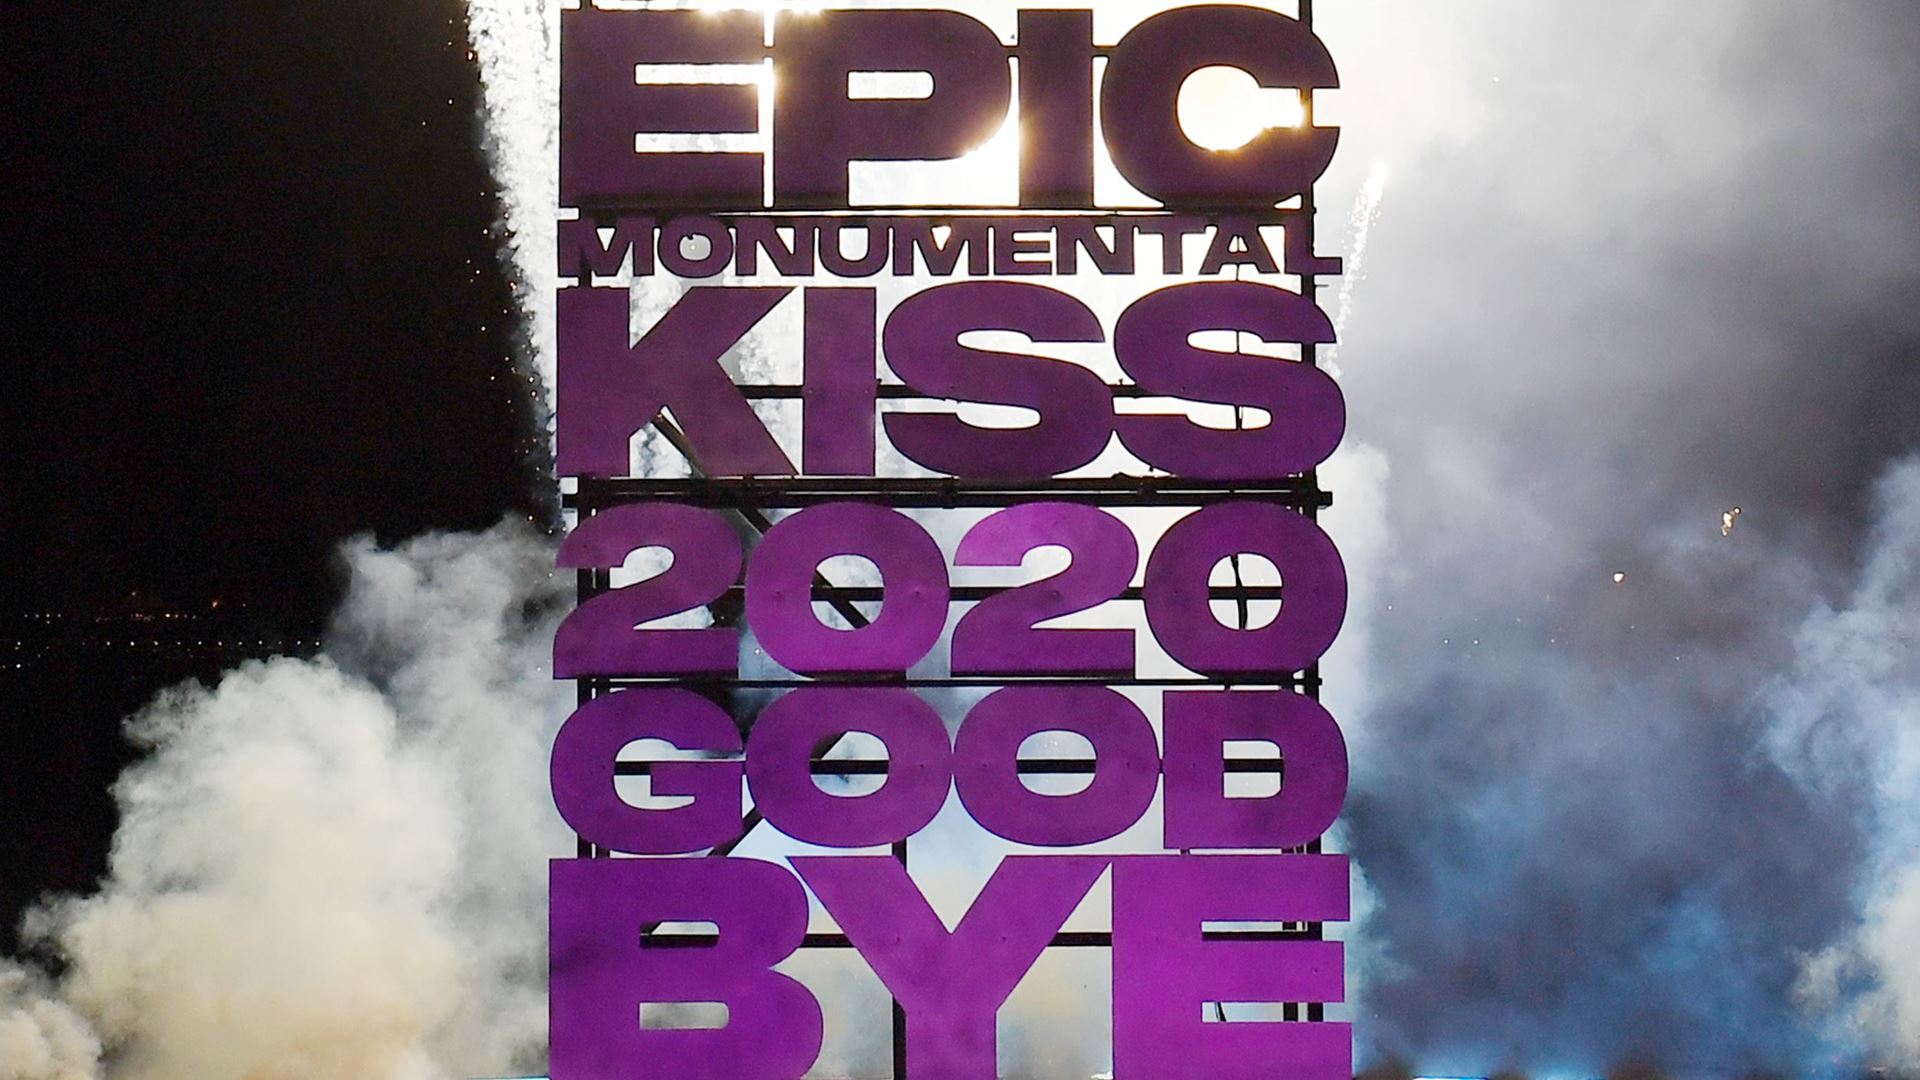 Kiss Off 2020 Sign from Las Vegas' New Year's Eve virtual event on December 31, 2020